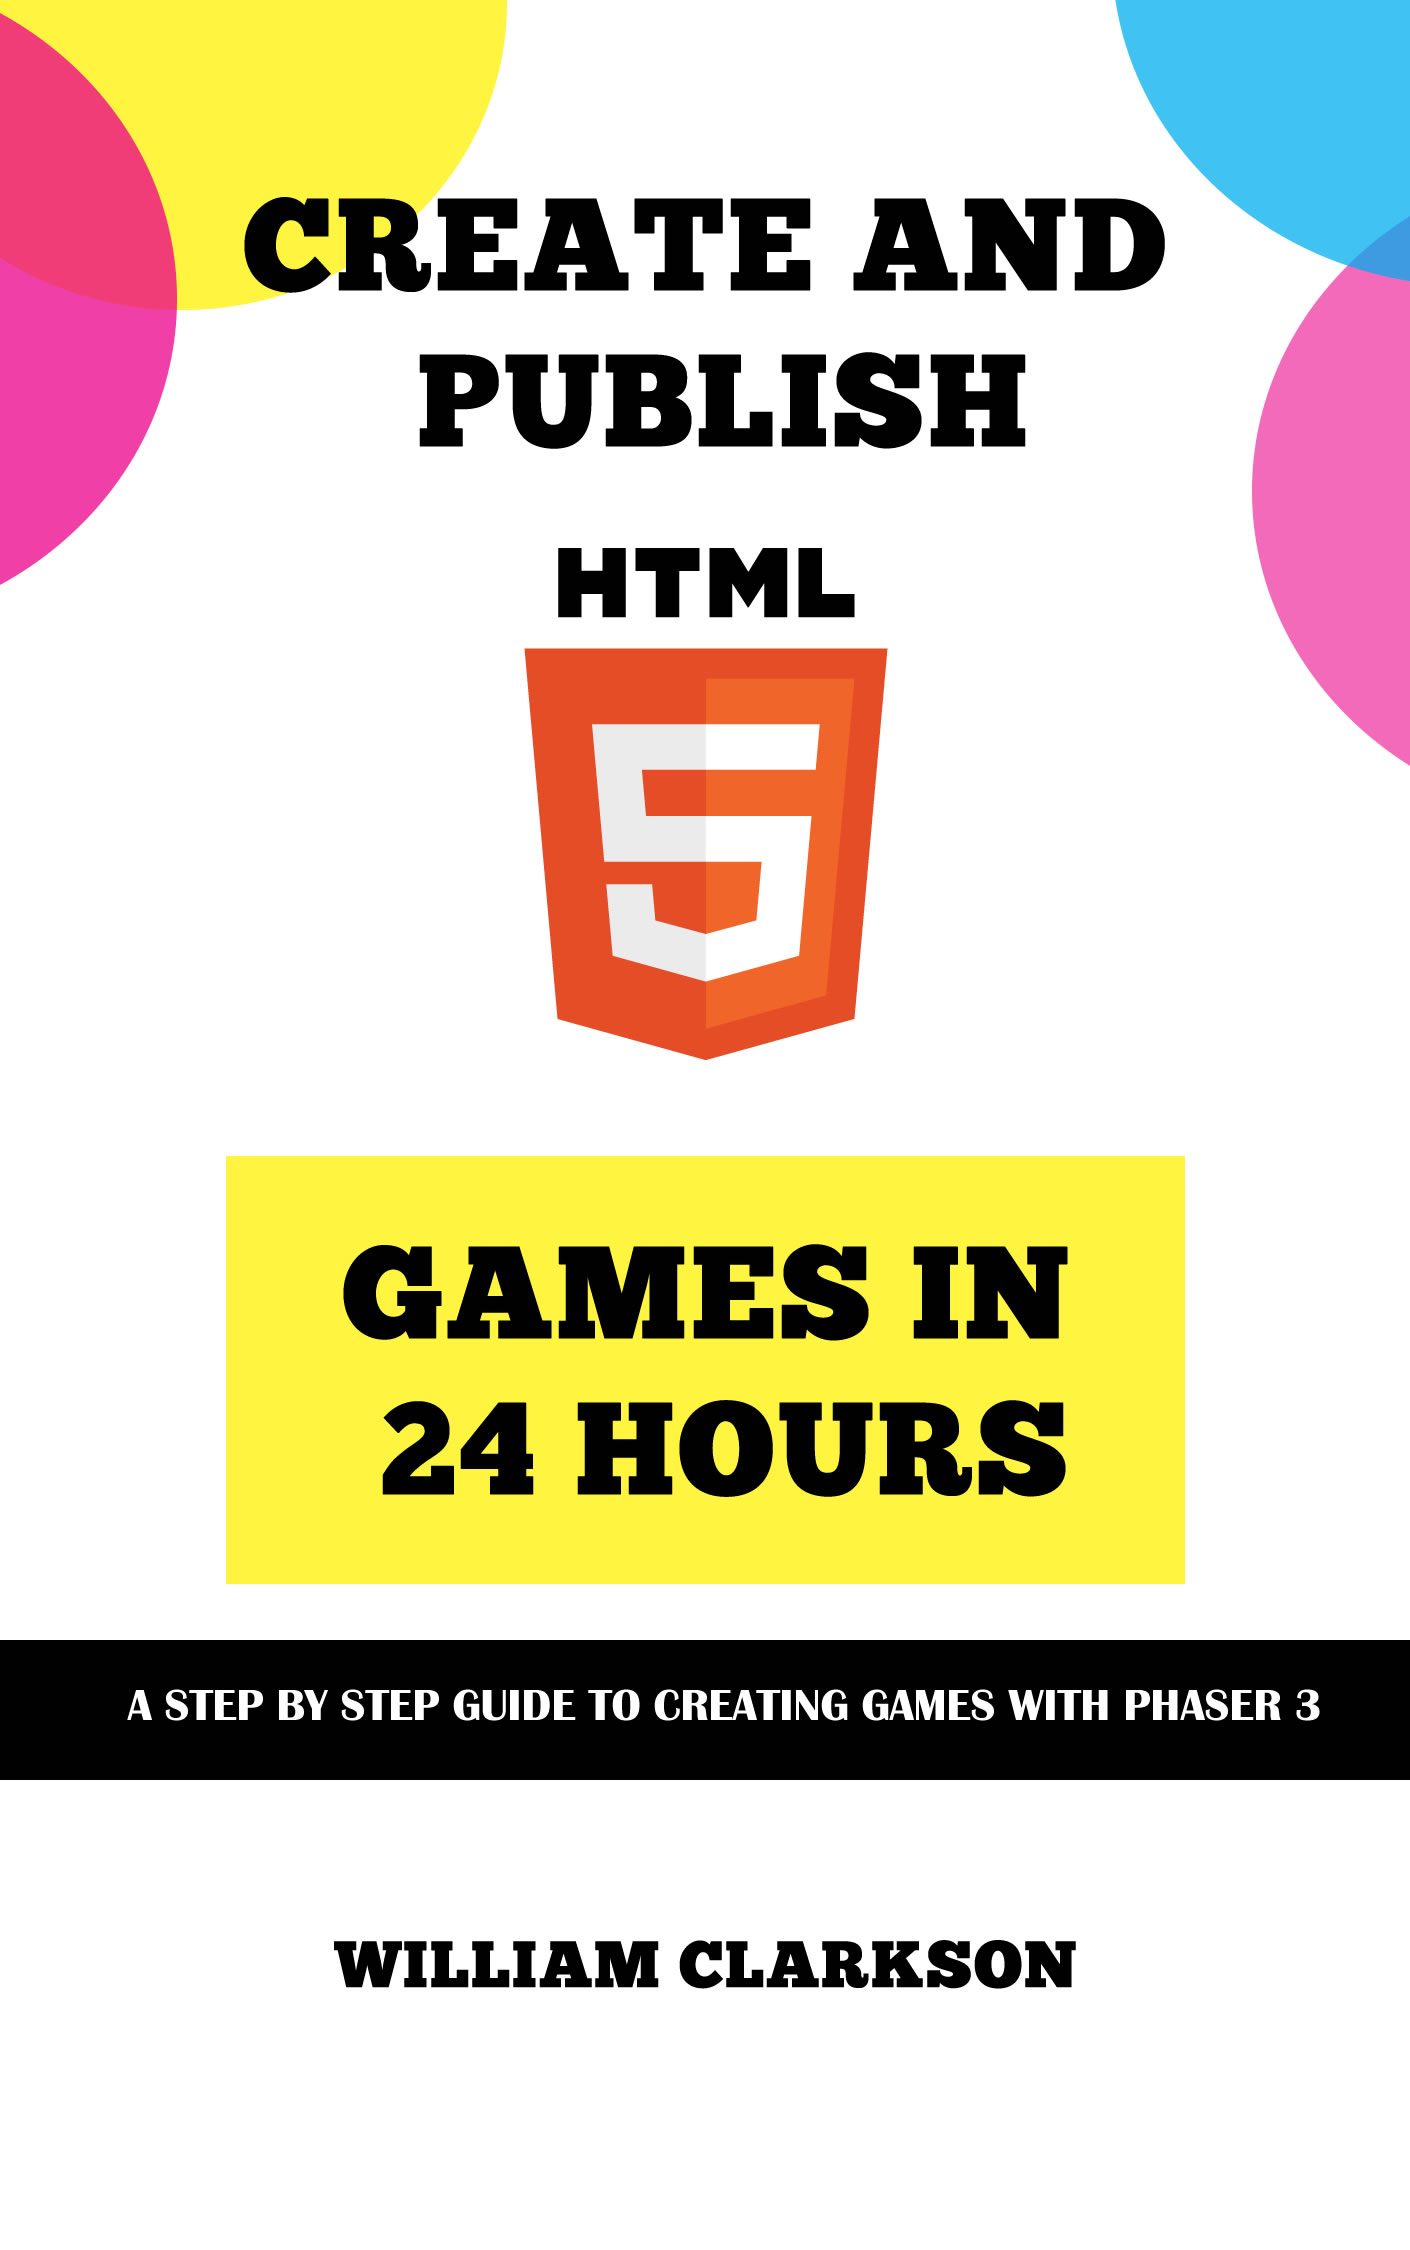 Create and Publish HTML5 Games in 24 Hours - Excerpt